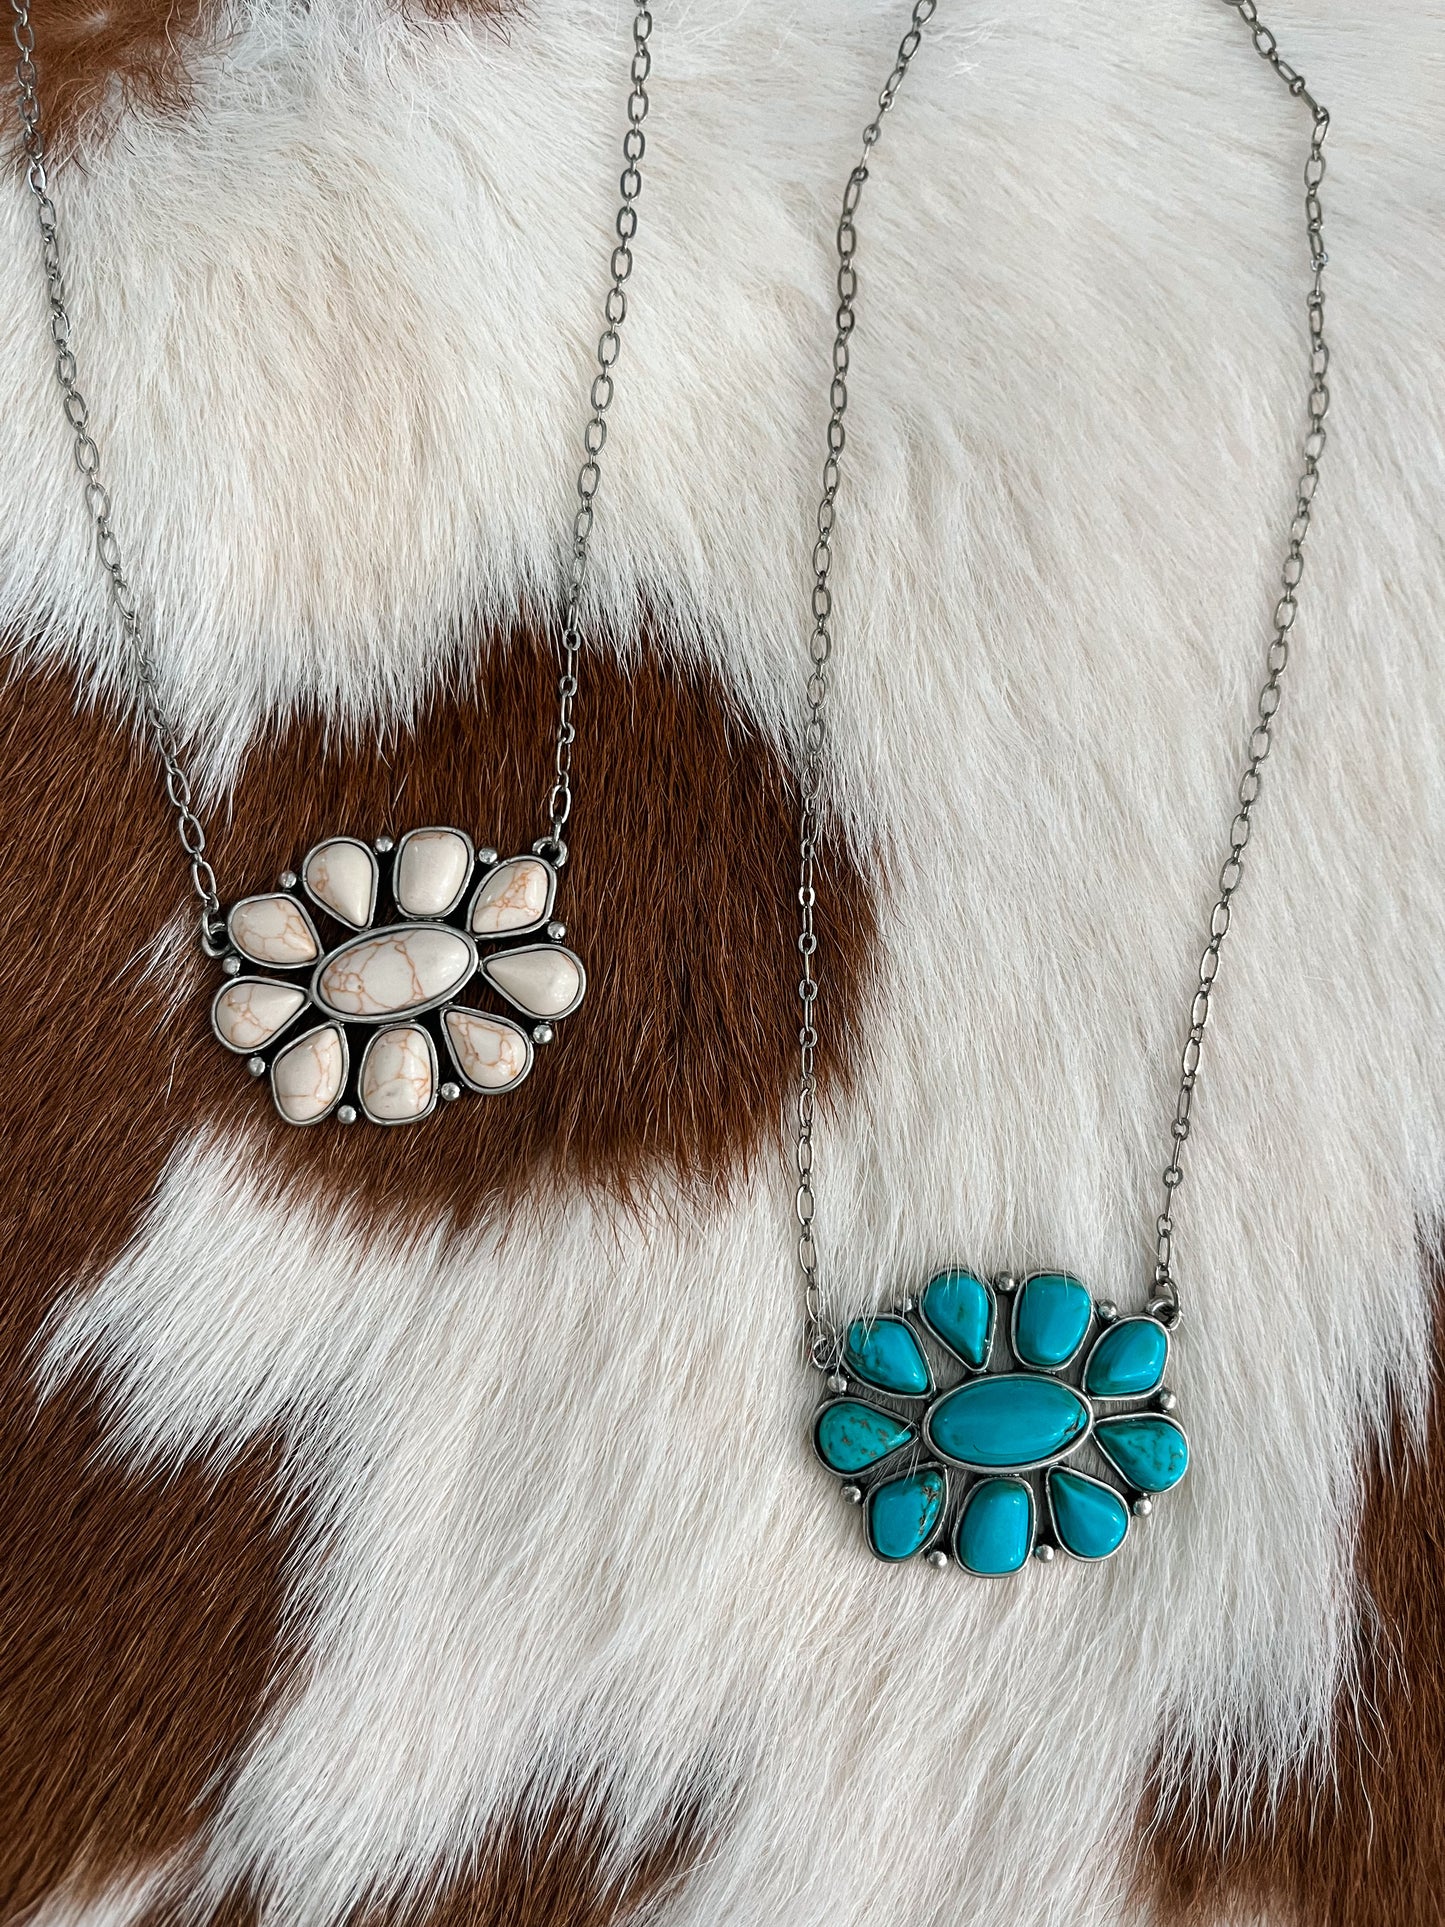 The Cluster Necklace (2 options)